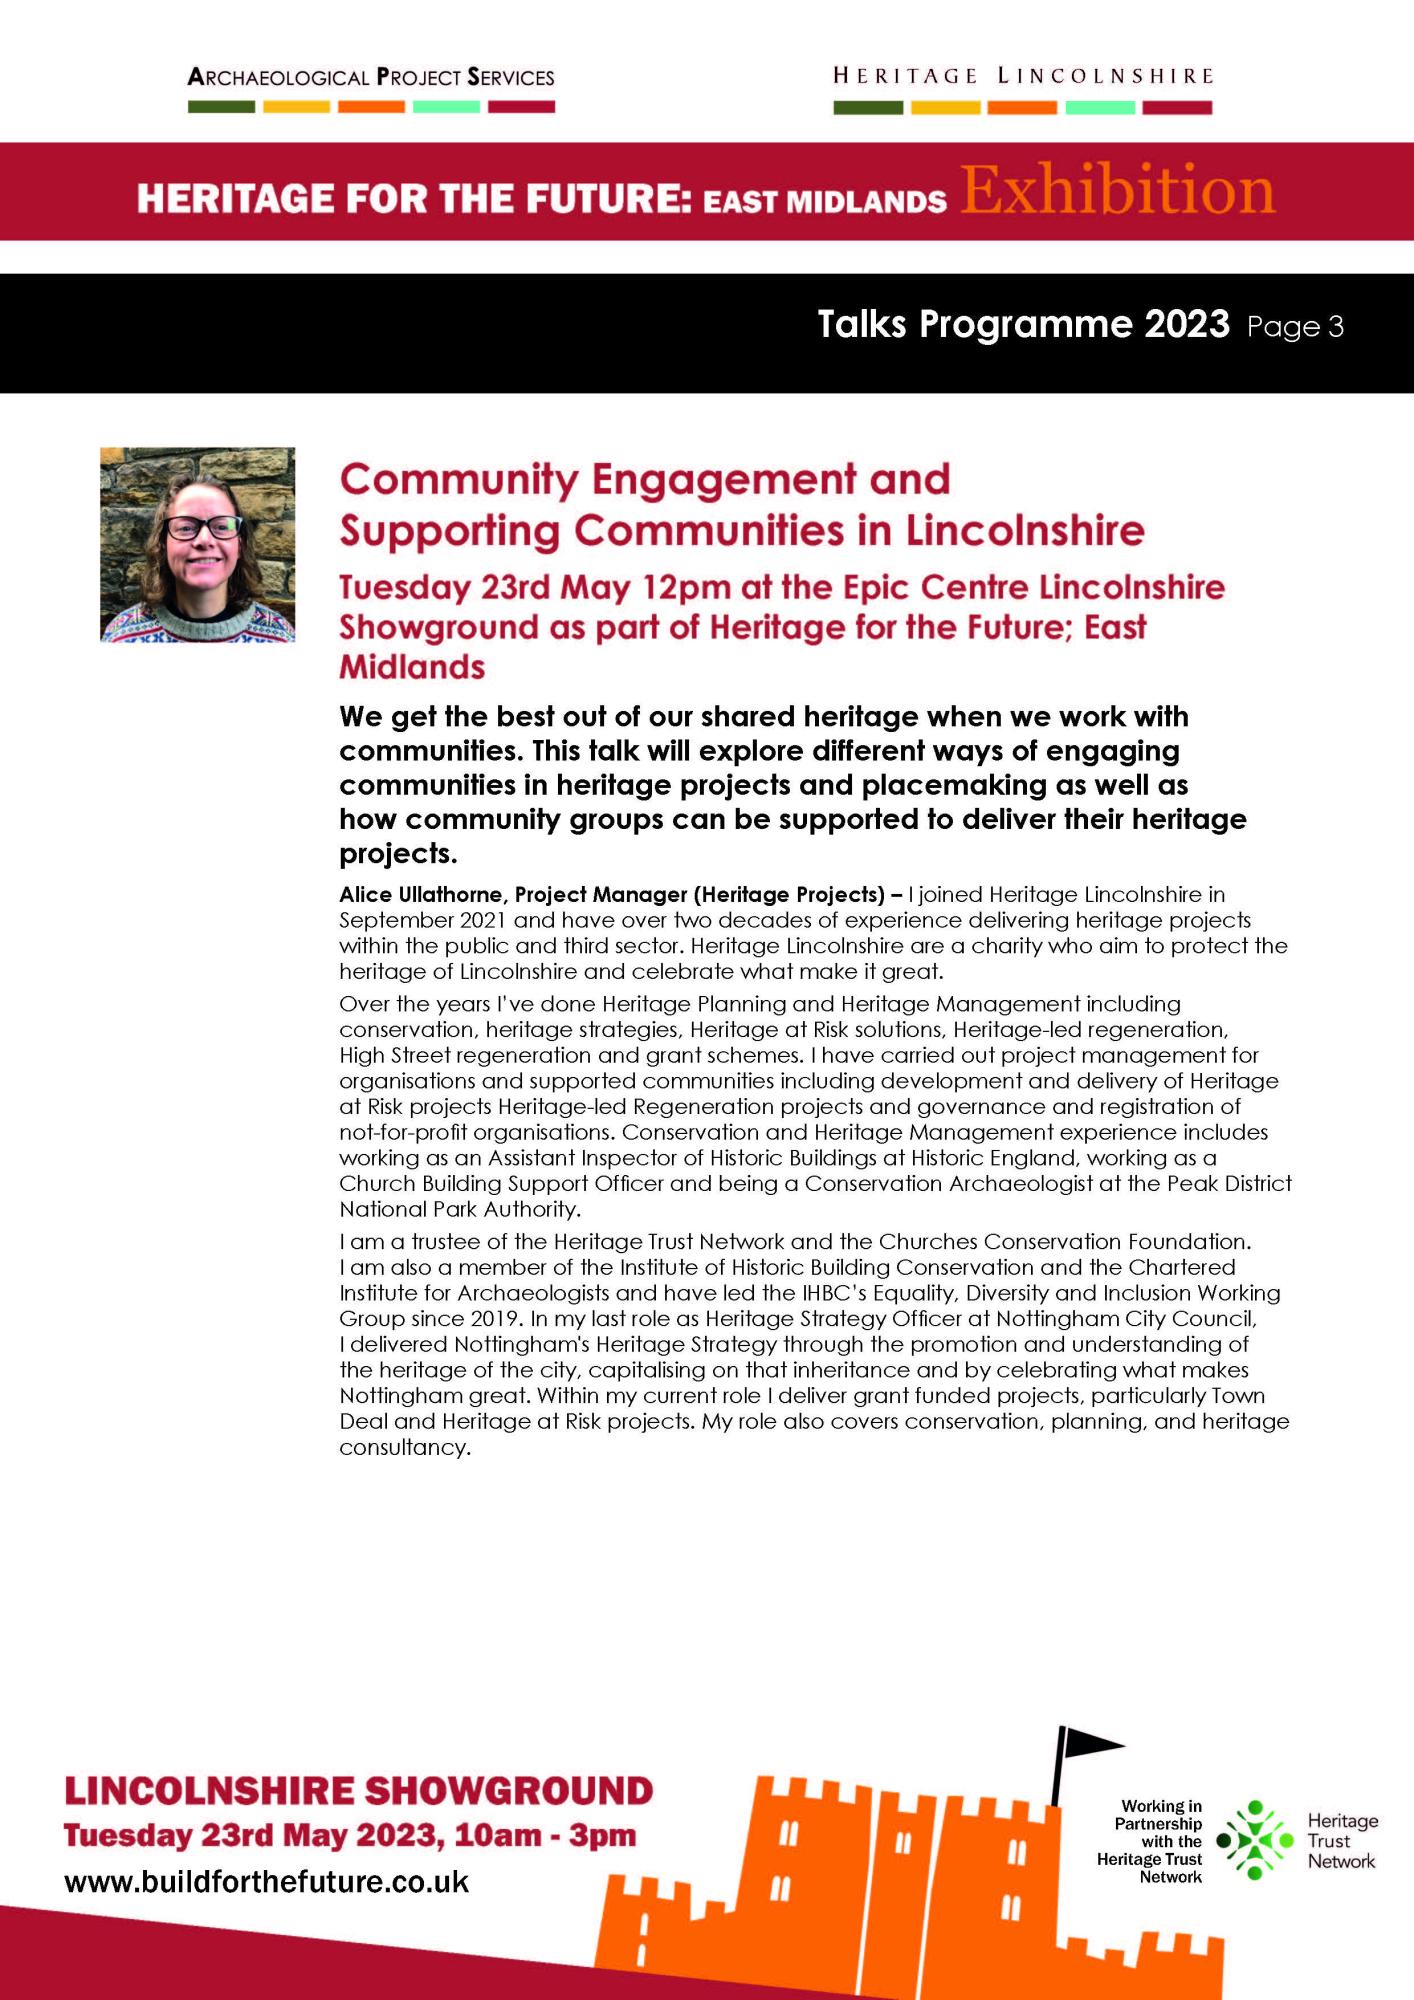 Community engagement and supporting communities in Lincolnshire